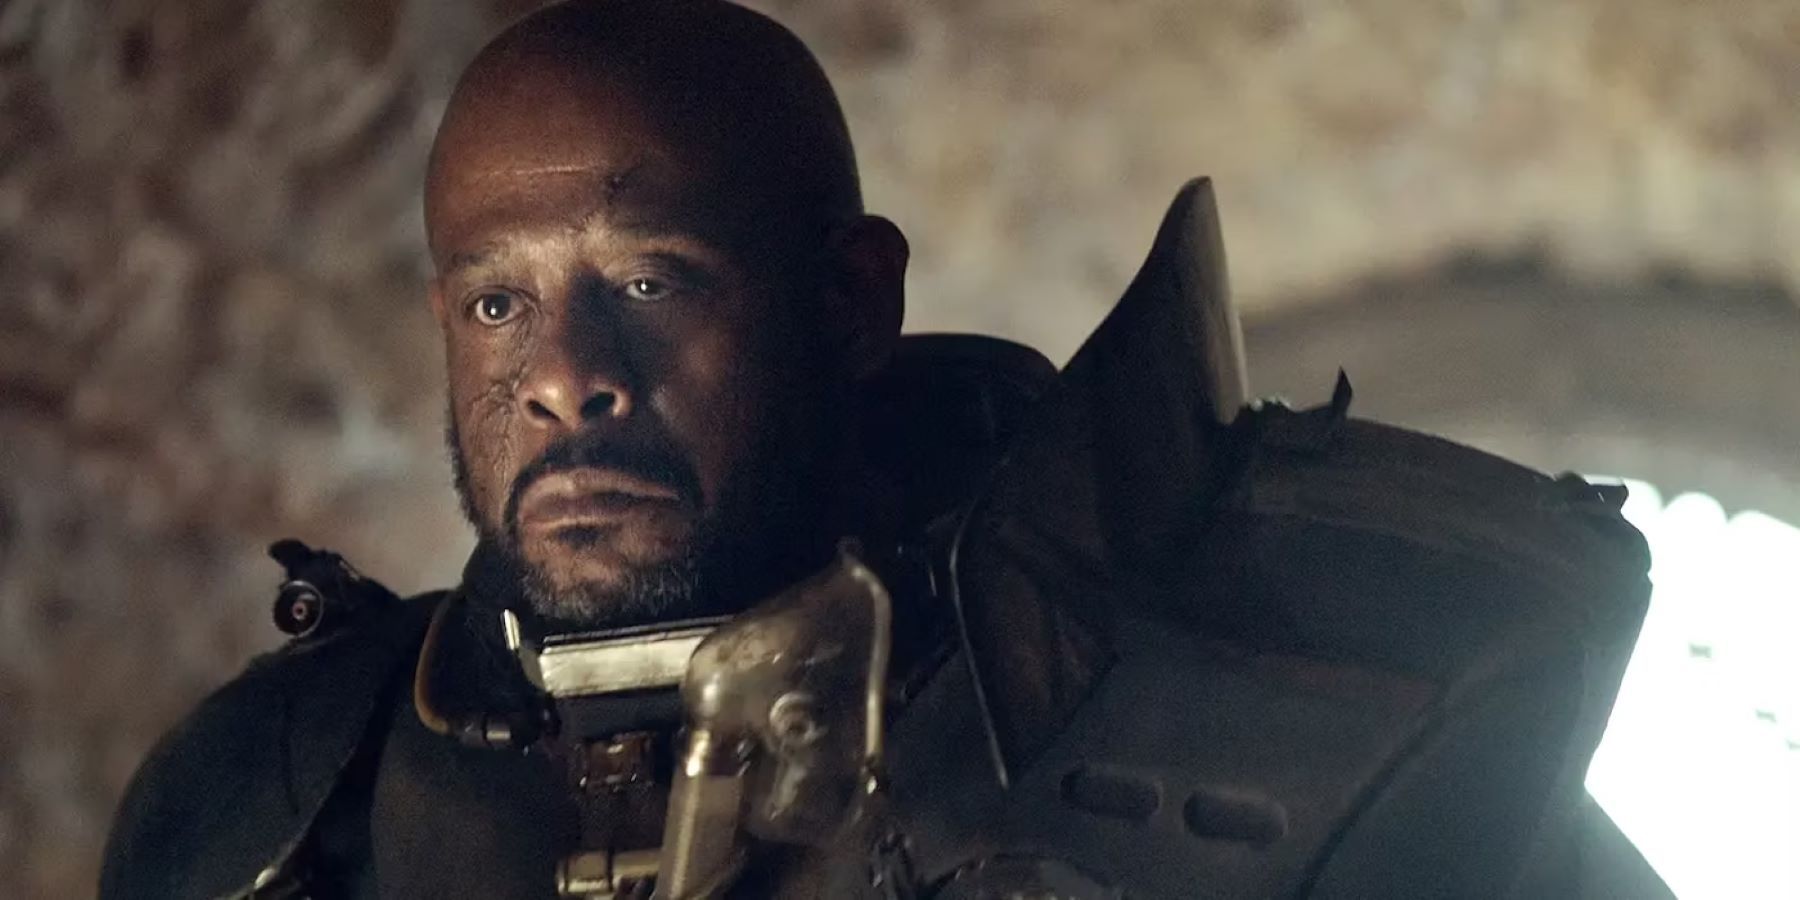 Forest Whitaker as live action Saw Gerrera